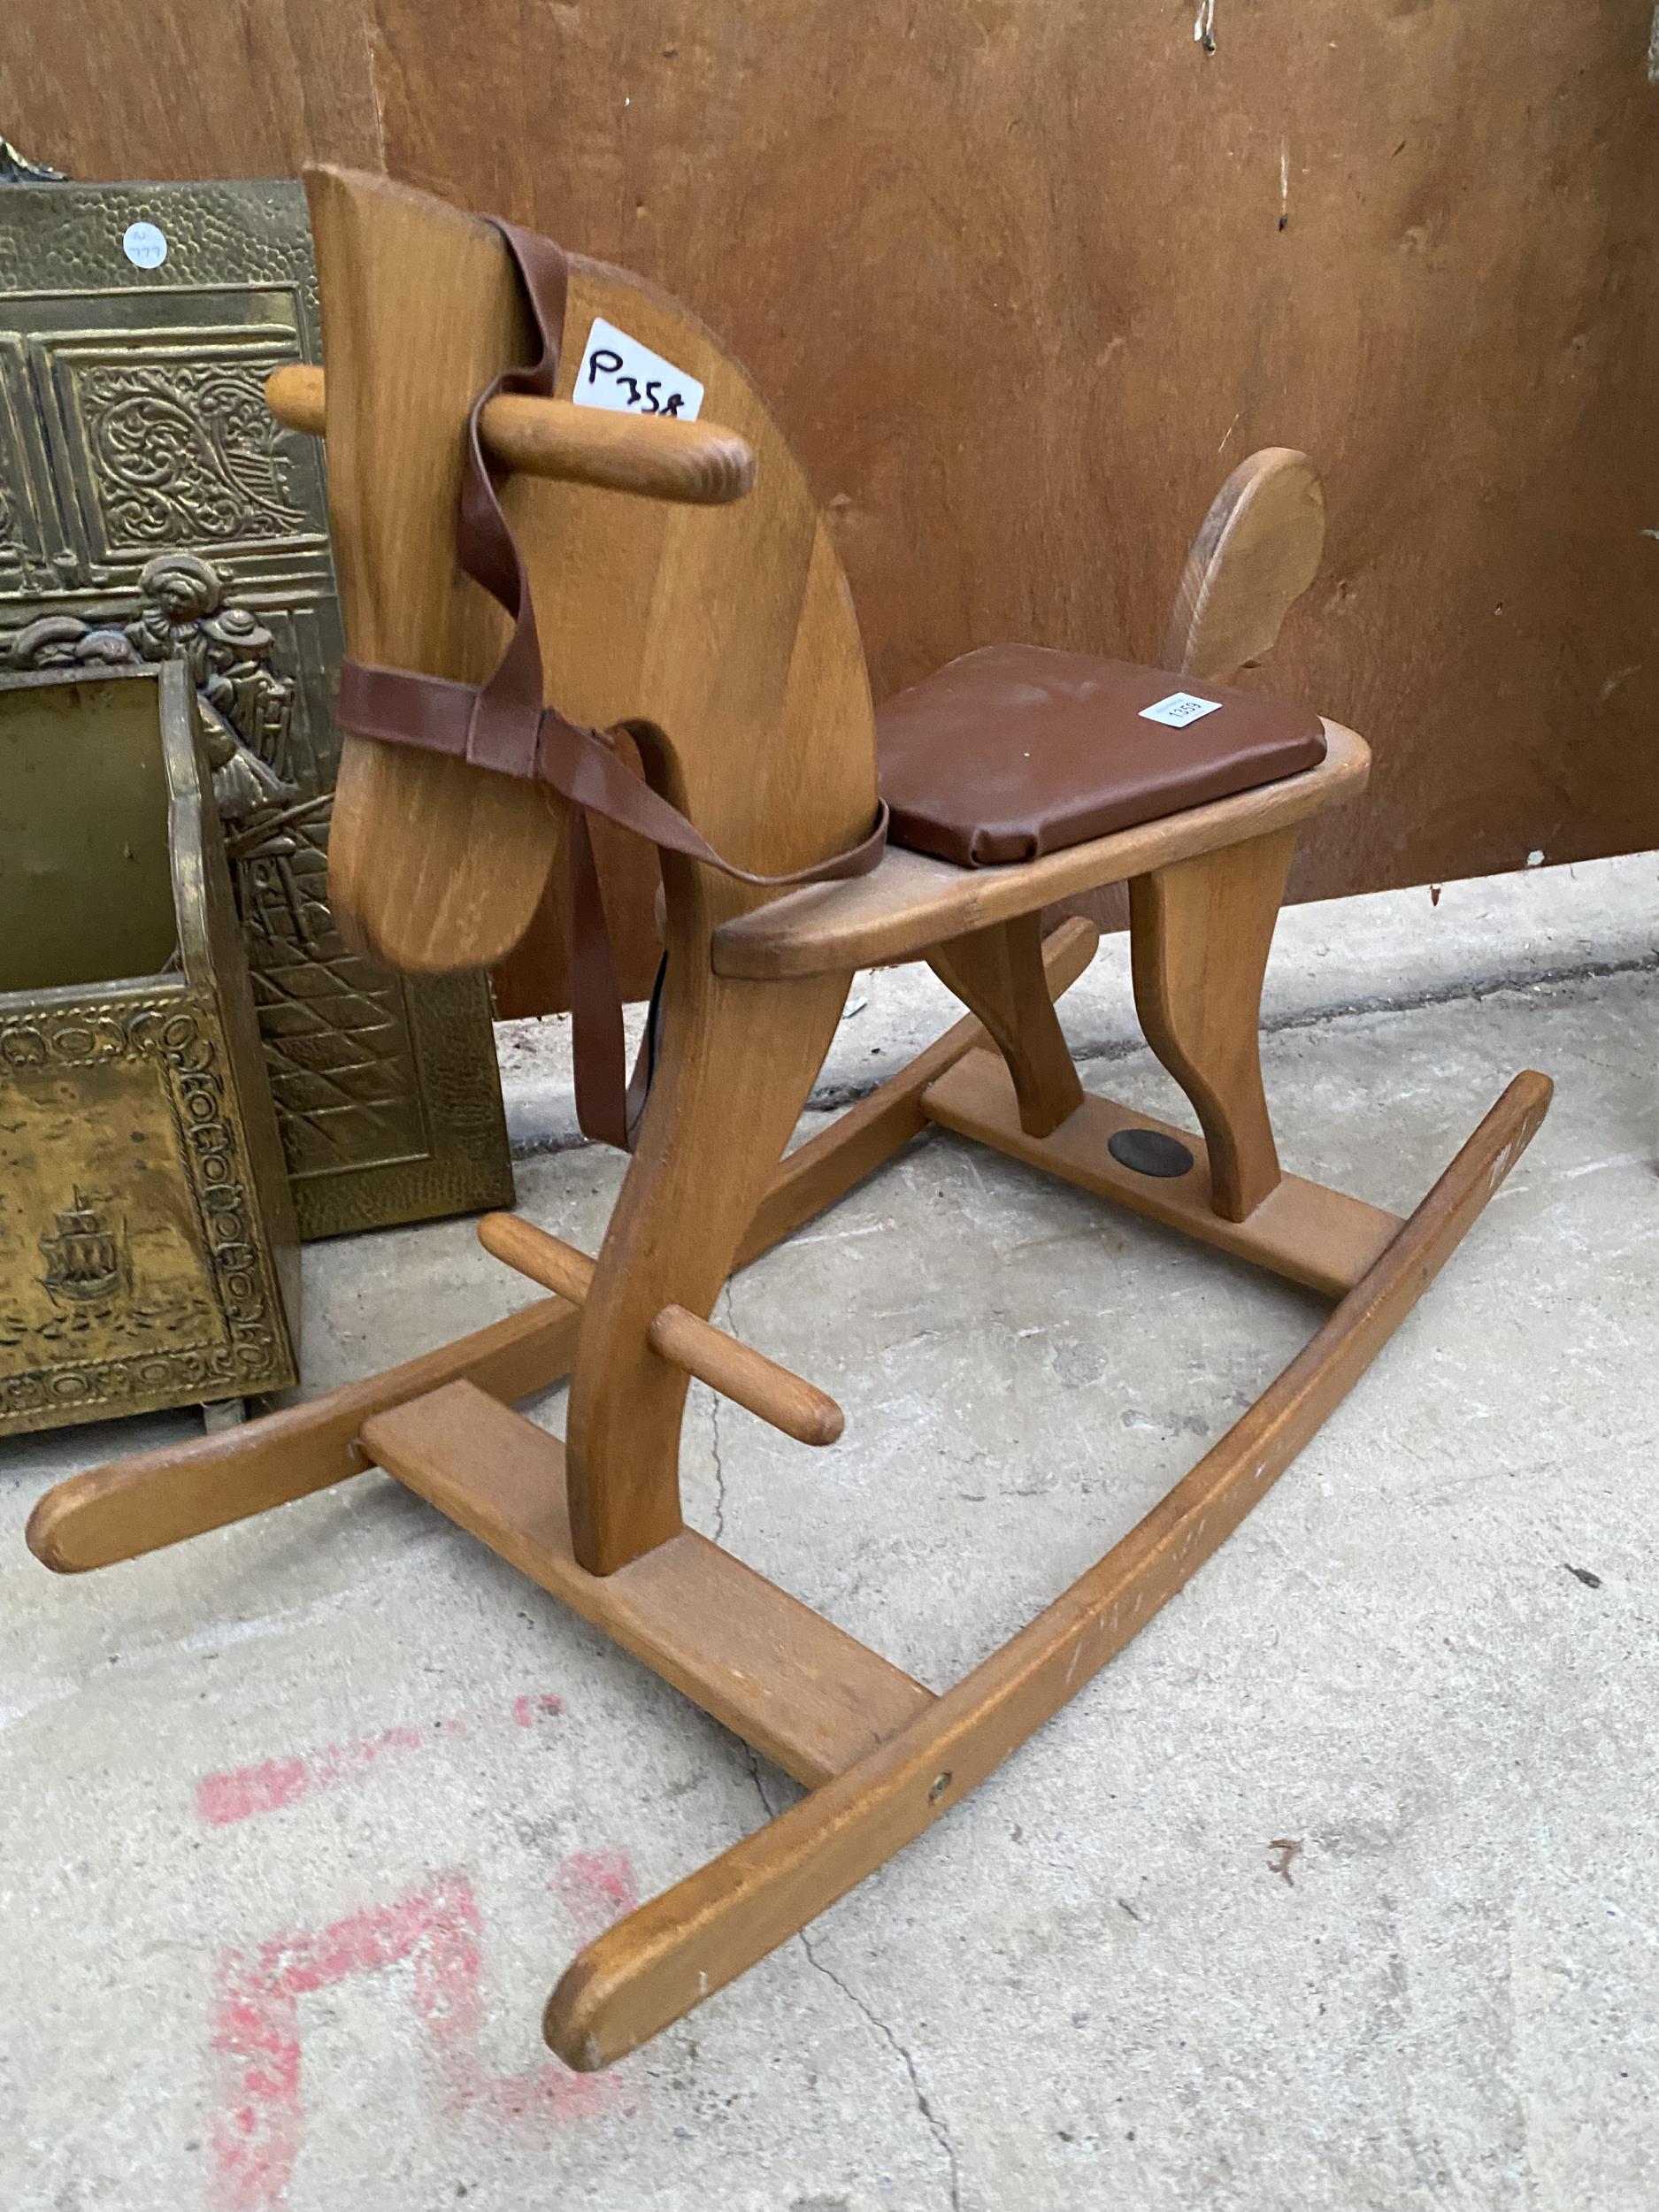 A VINTAGE STYLE MOULIN CHILDS ROCKING CHAIR